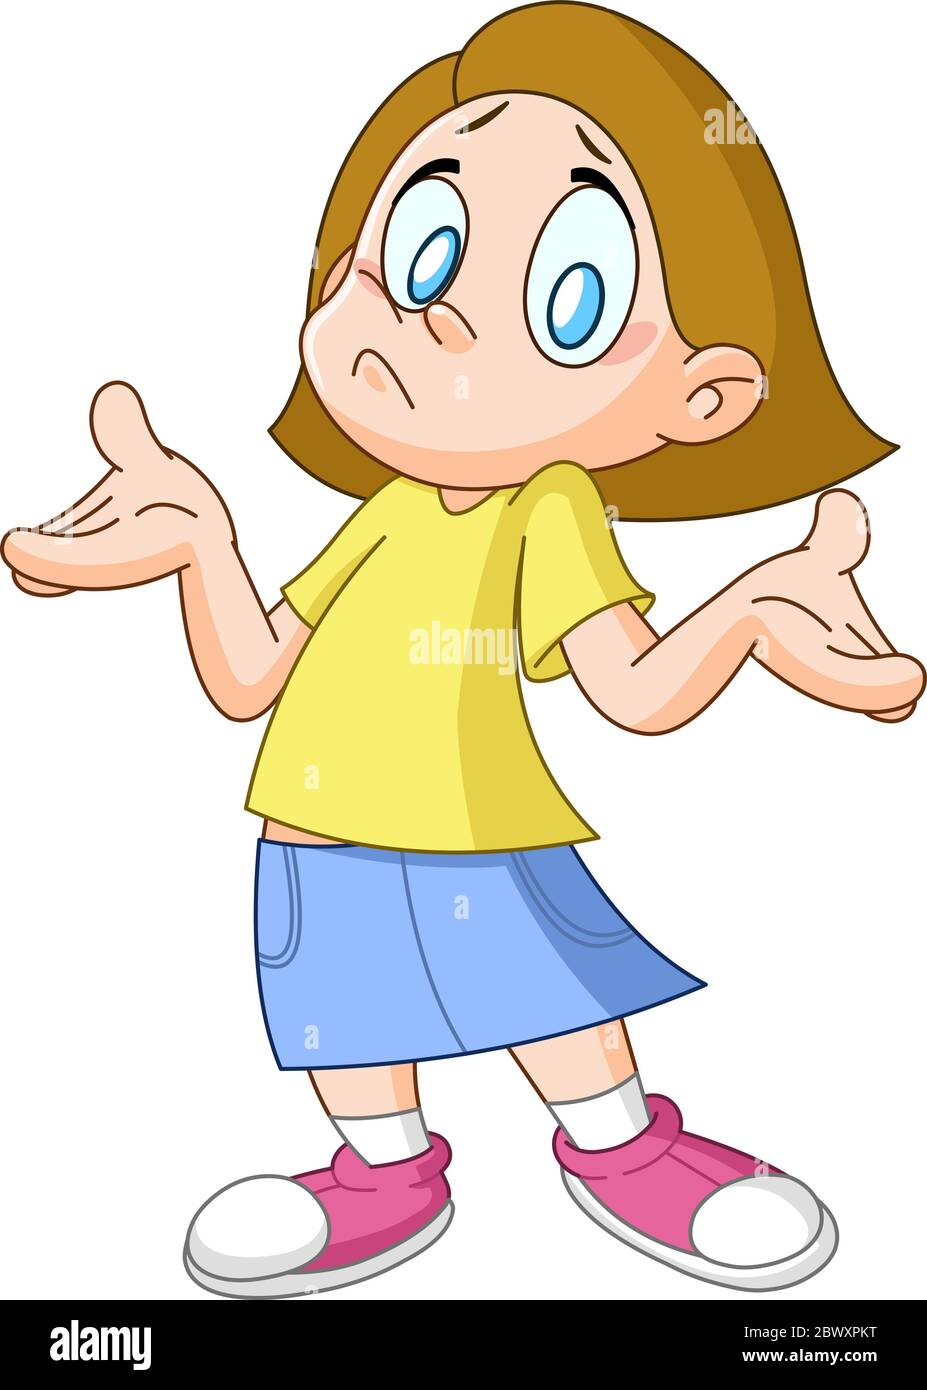 Young girl shrugging shoulders expressing luck of knowledge. Don’t know gesture. Stock Vector